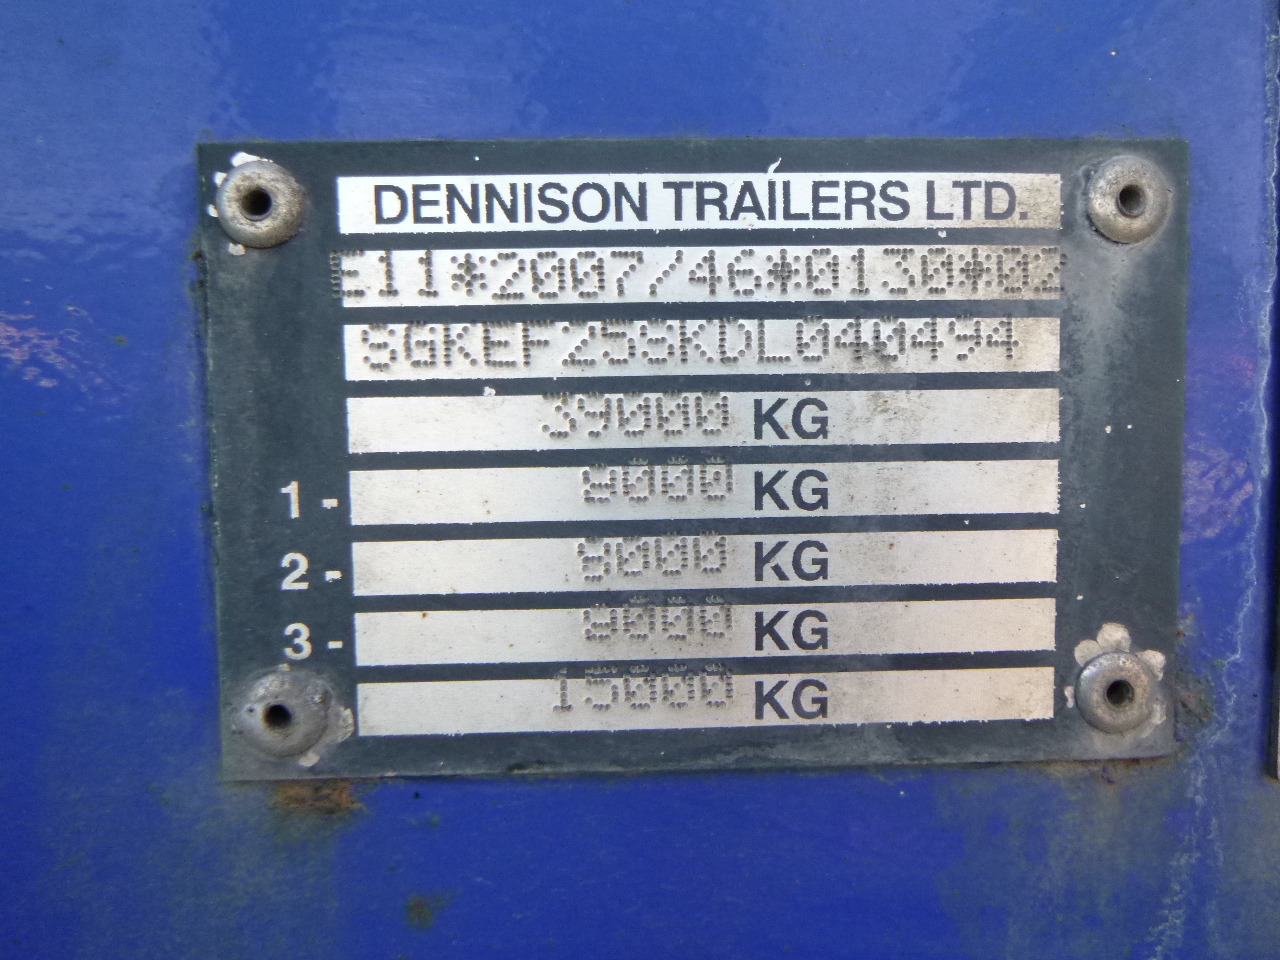 Dennison Stack - 3 x container trailer 20-30-40-45 ft إيجار Dennison Stack - 3 x container trailer 20-30-40-45 ft: صور 24